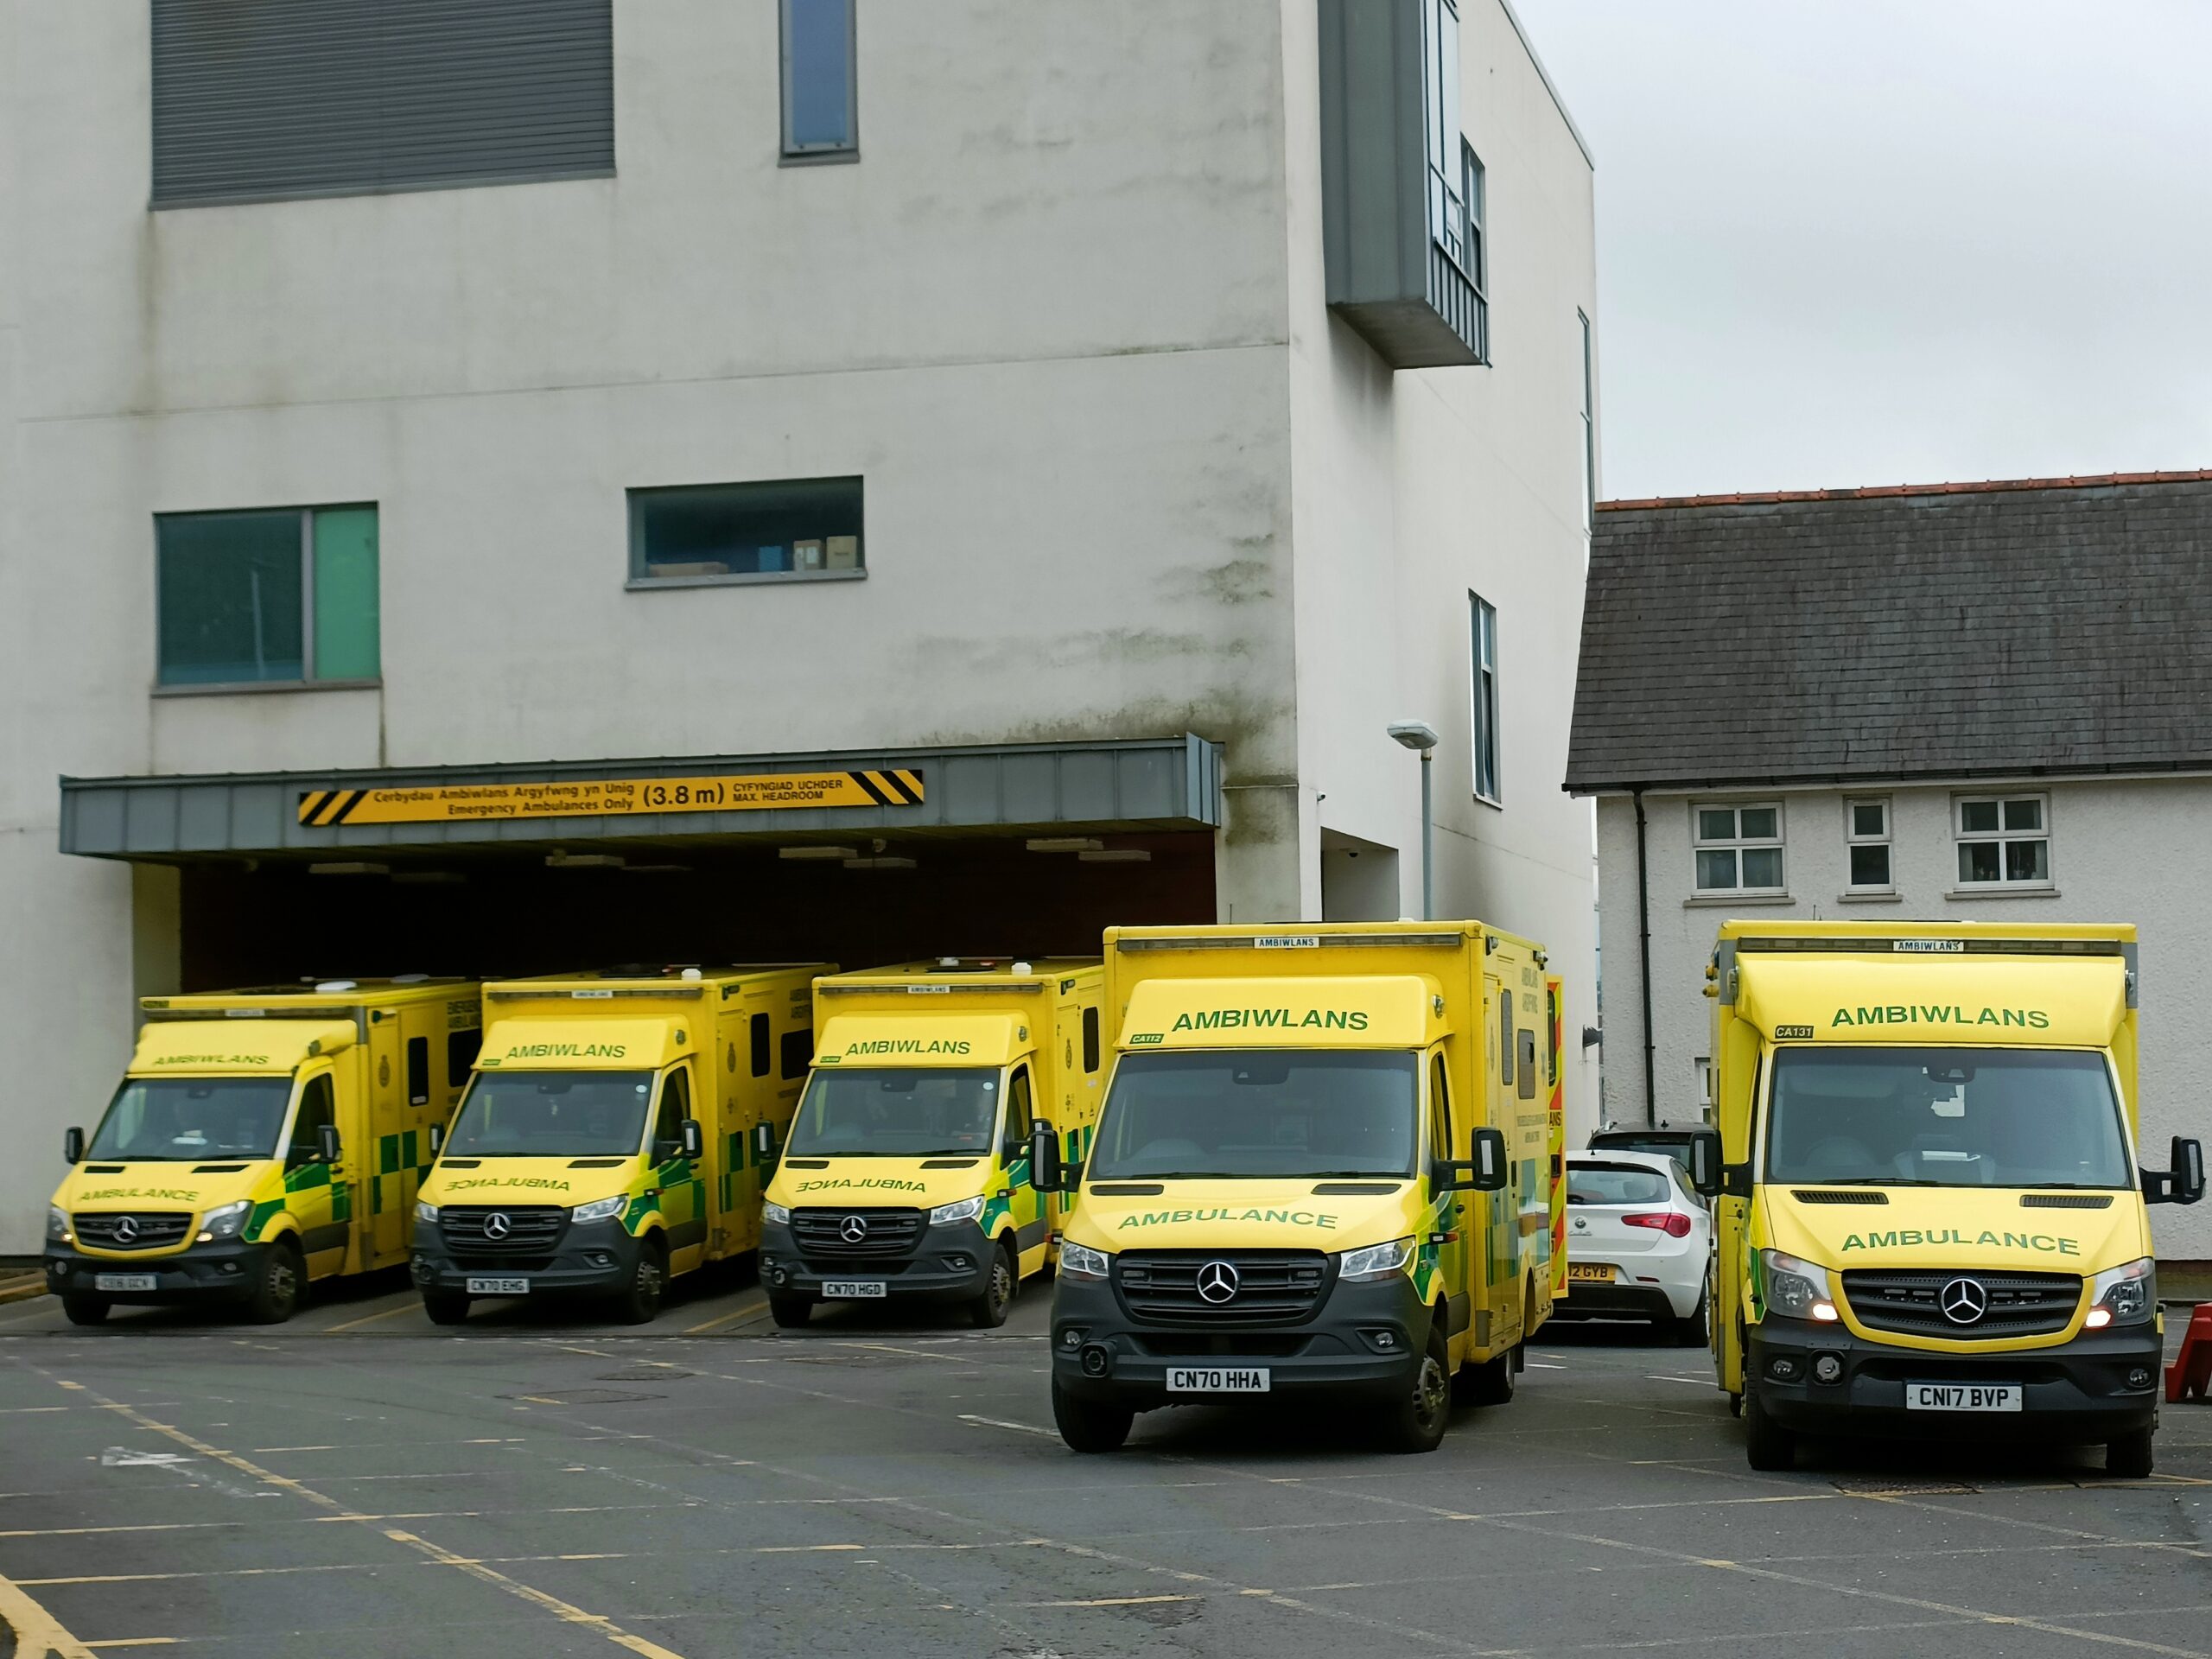 Welsh Ambulance response times dubbed ‘unacceptable and dangerous’ by Welsh Liberal Democrats